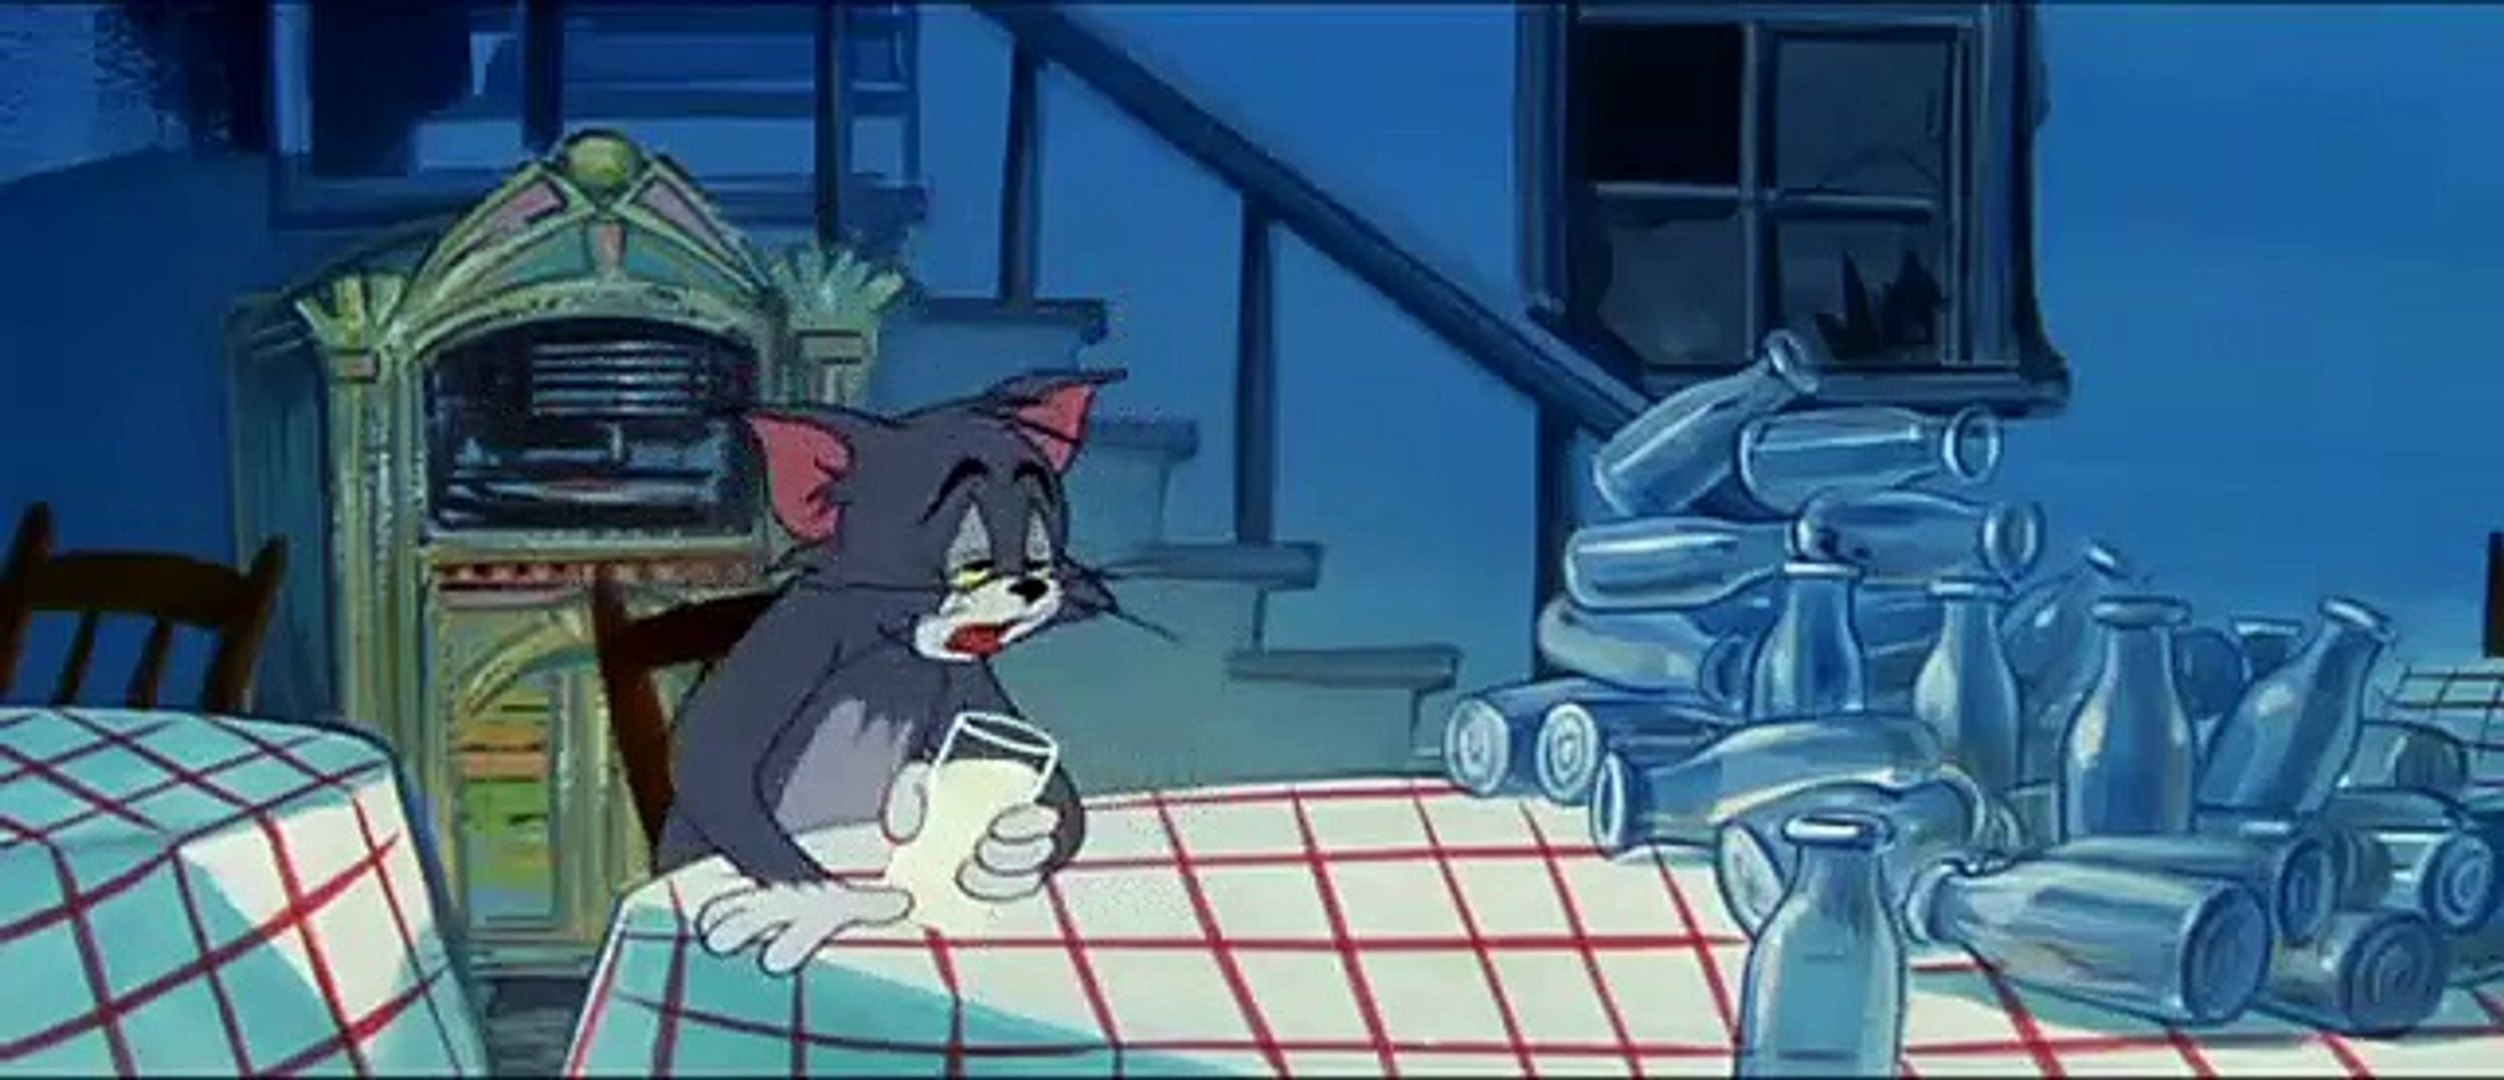 Blue cat blues tom and jerry last episode full episode Tom And Jerry Classic Collection Episode 103 104 Blue Cat Blues 1956 Barbecue Brawl 1956 Video Dailymotion